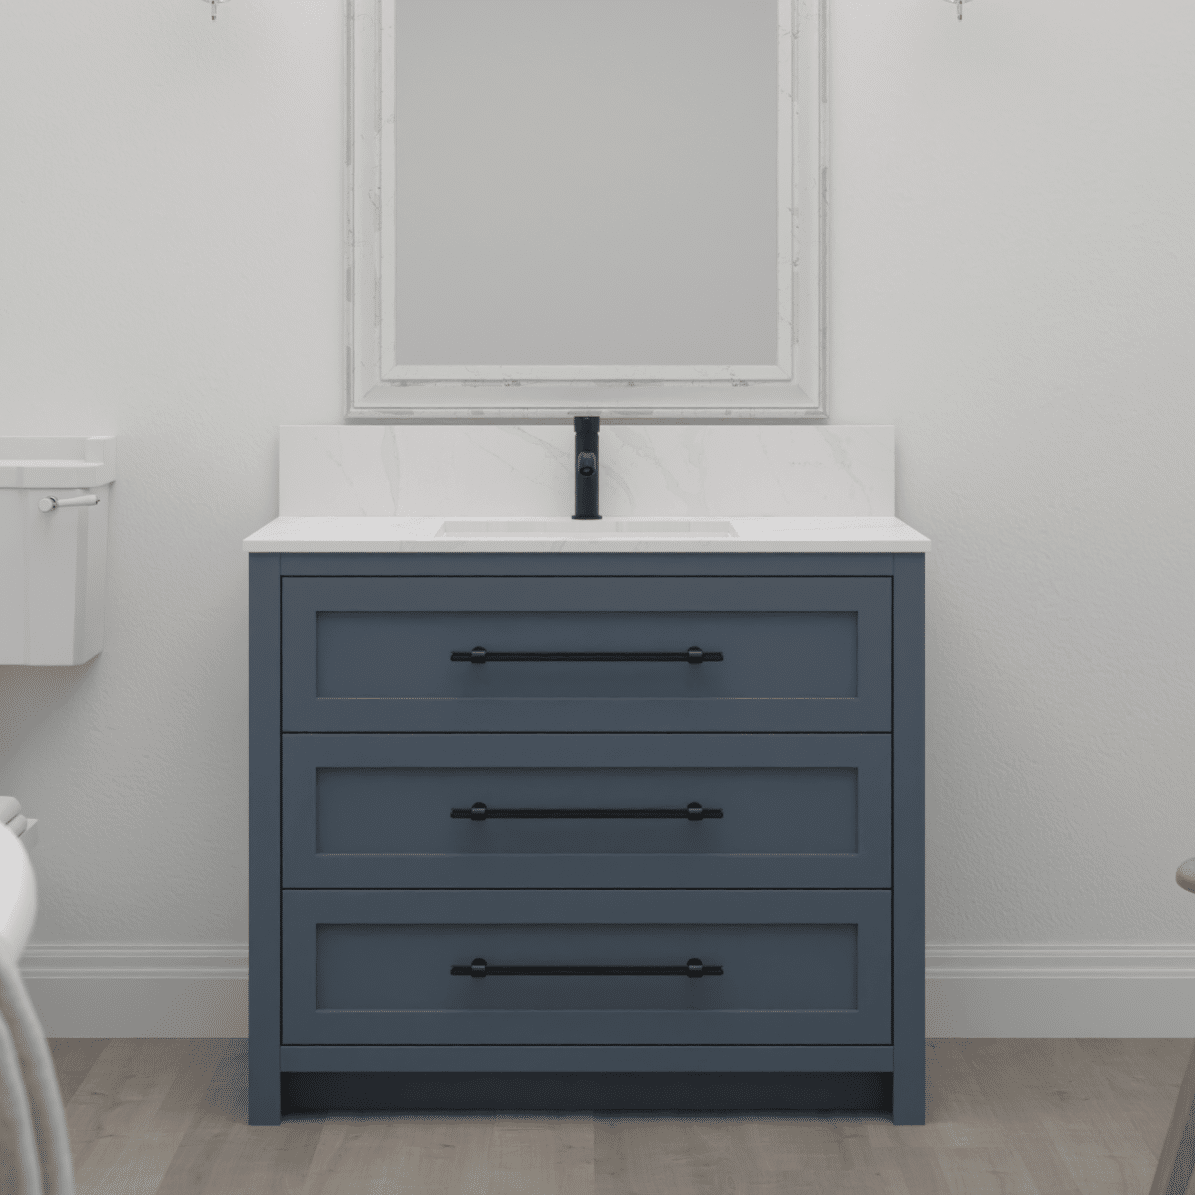 Three drawer single sink vanity unit with shaker fronts and in frame styling, white counter top and black bar handles